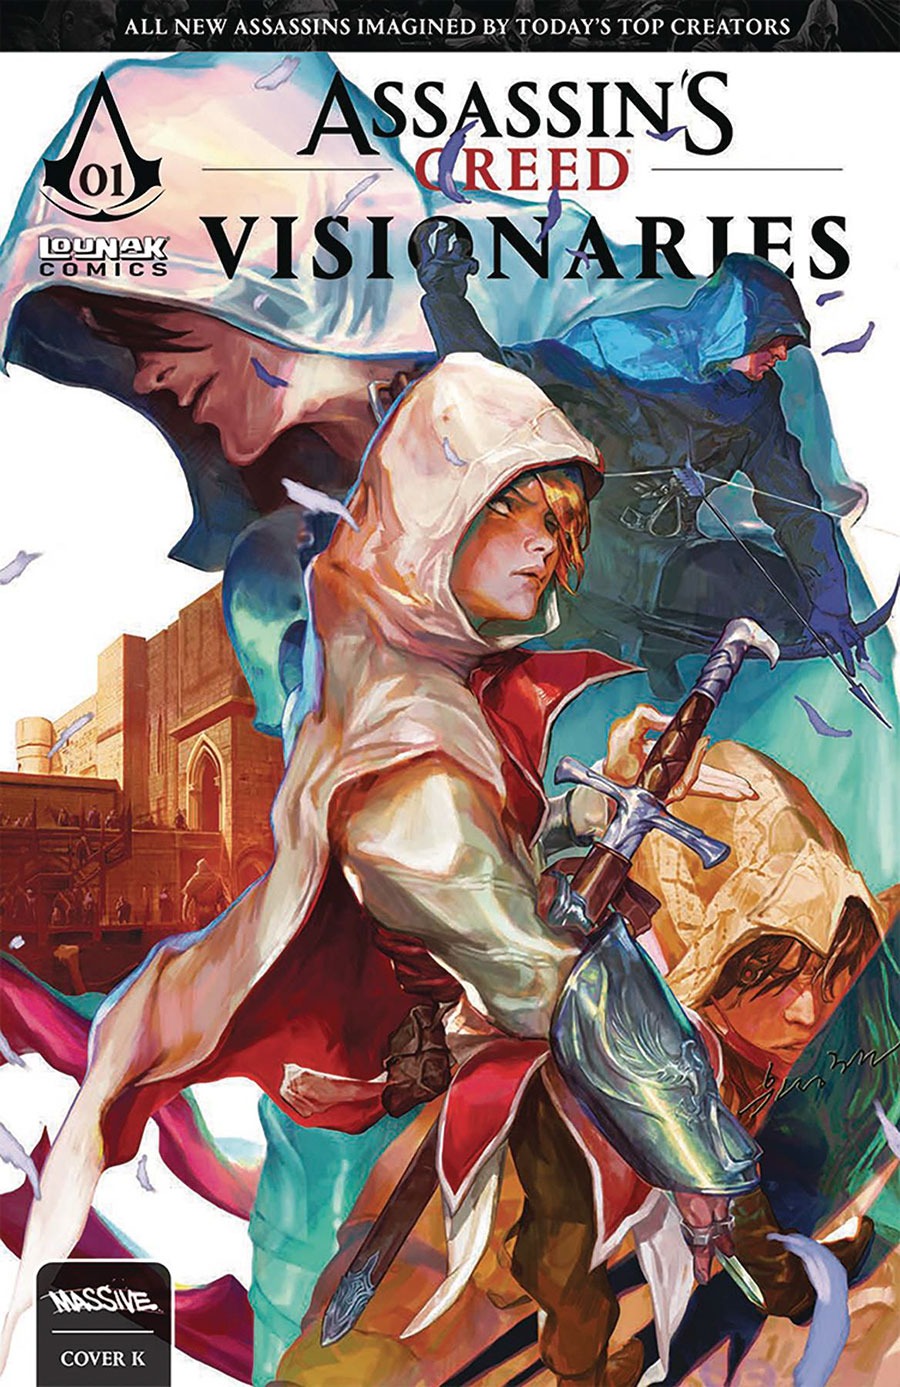 Assassins Creed Visionaries #1 Cover K Limited Edition Sunghan Yune Variant Cover